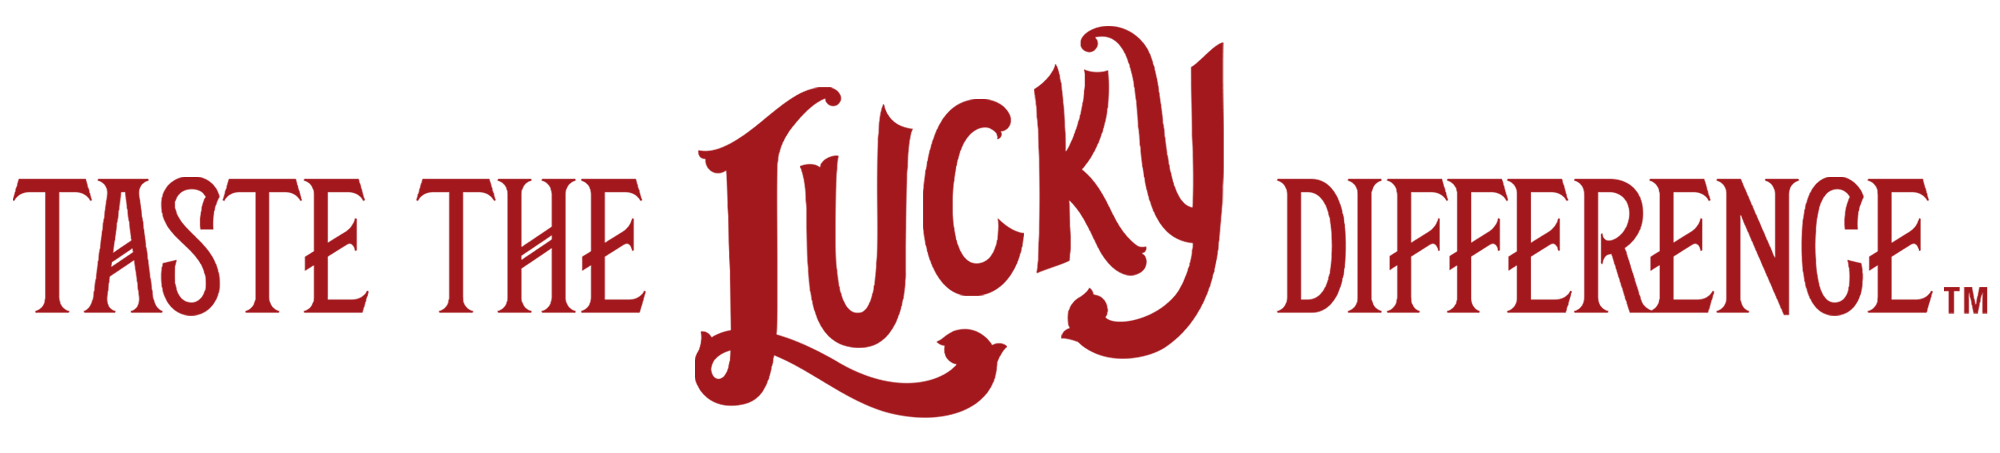 Get Lucky - Find A Bottle of Moonshine